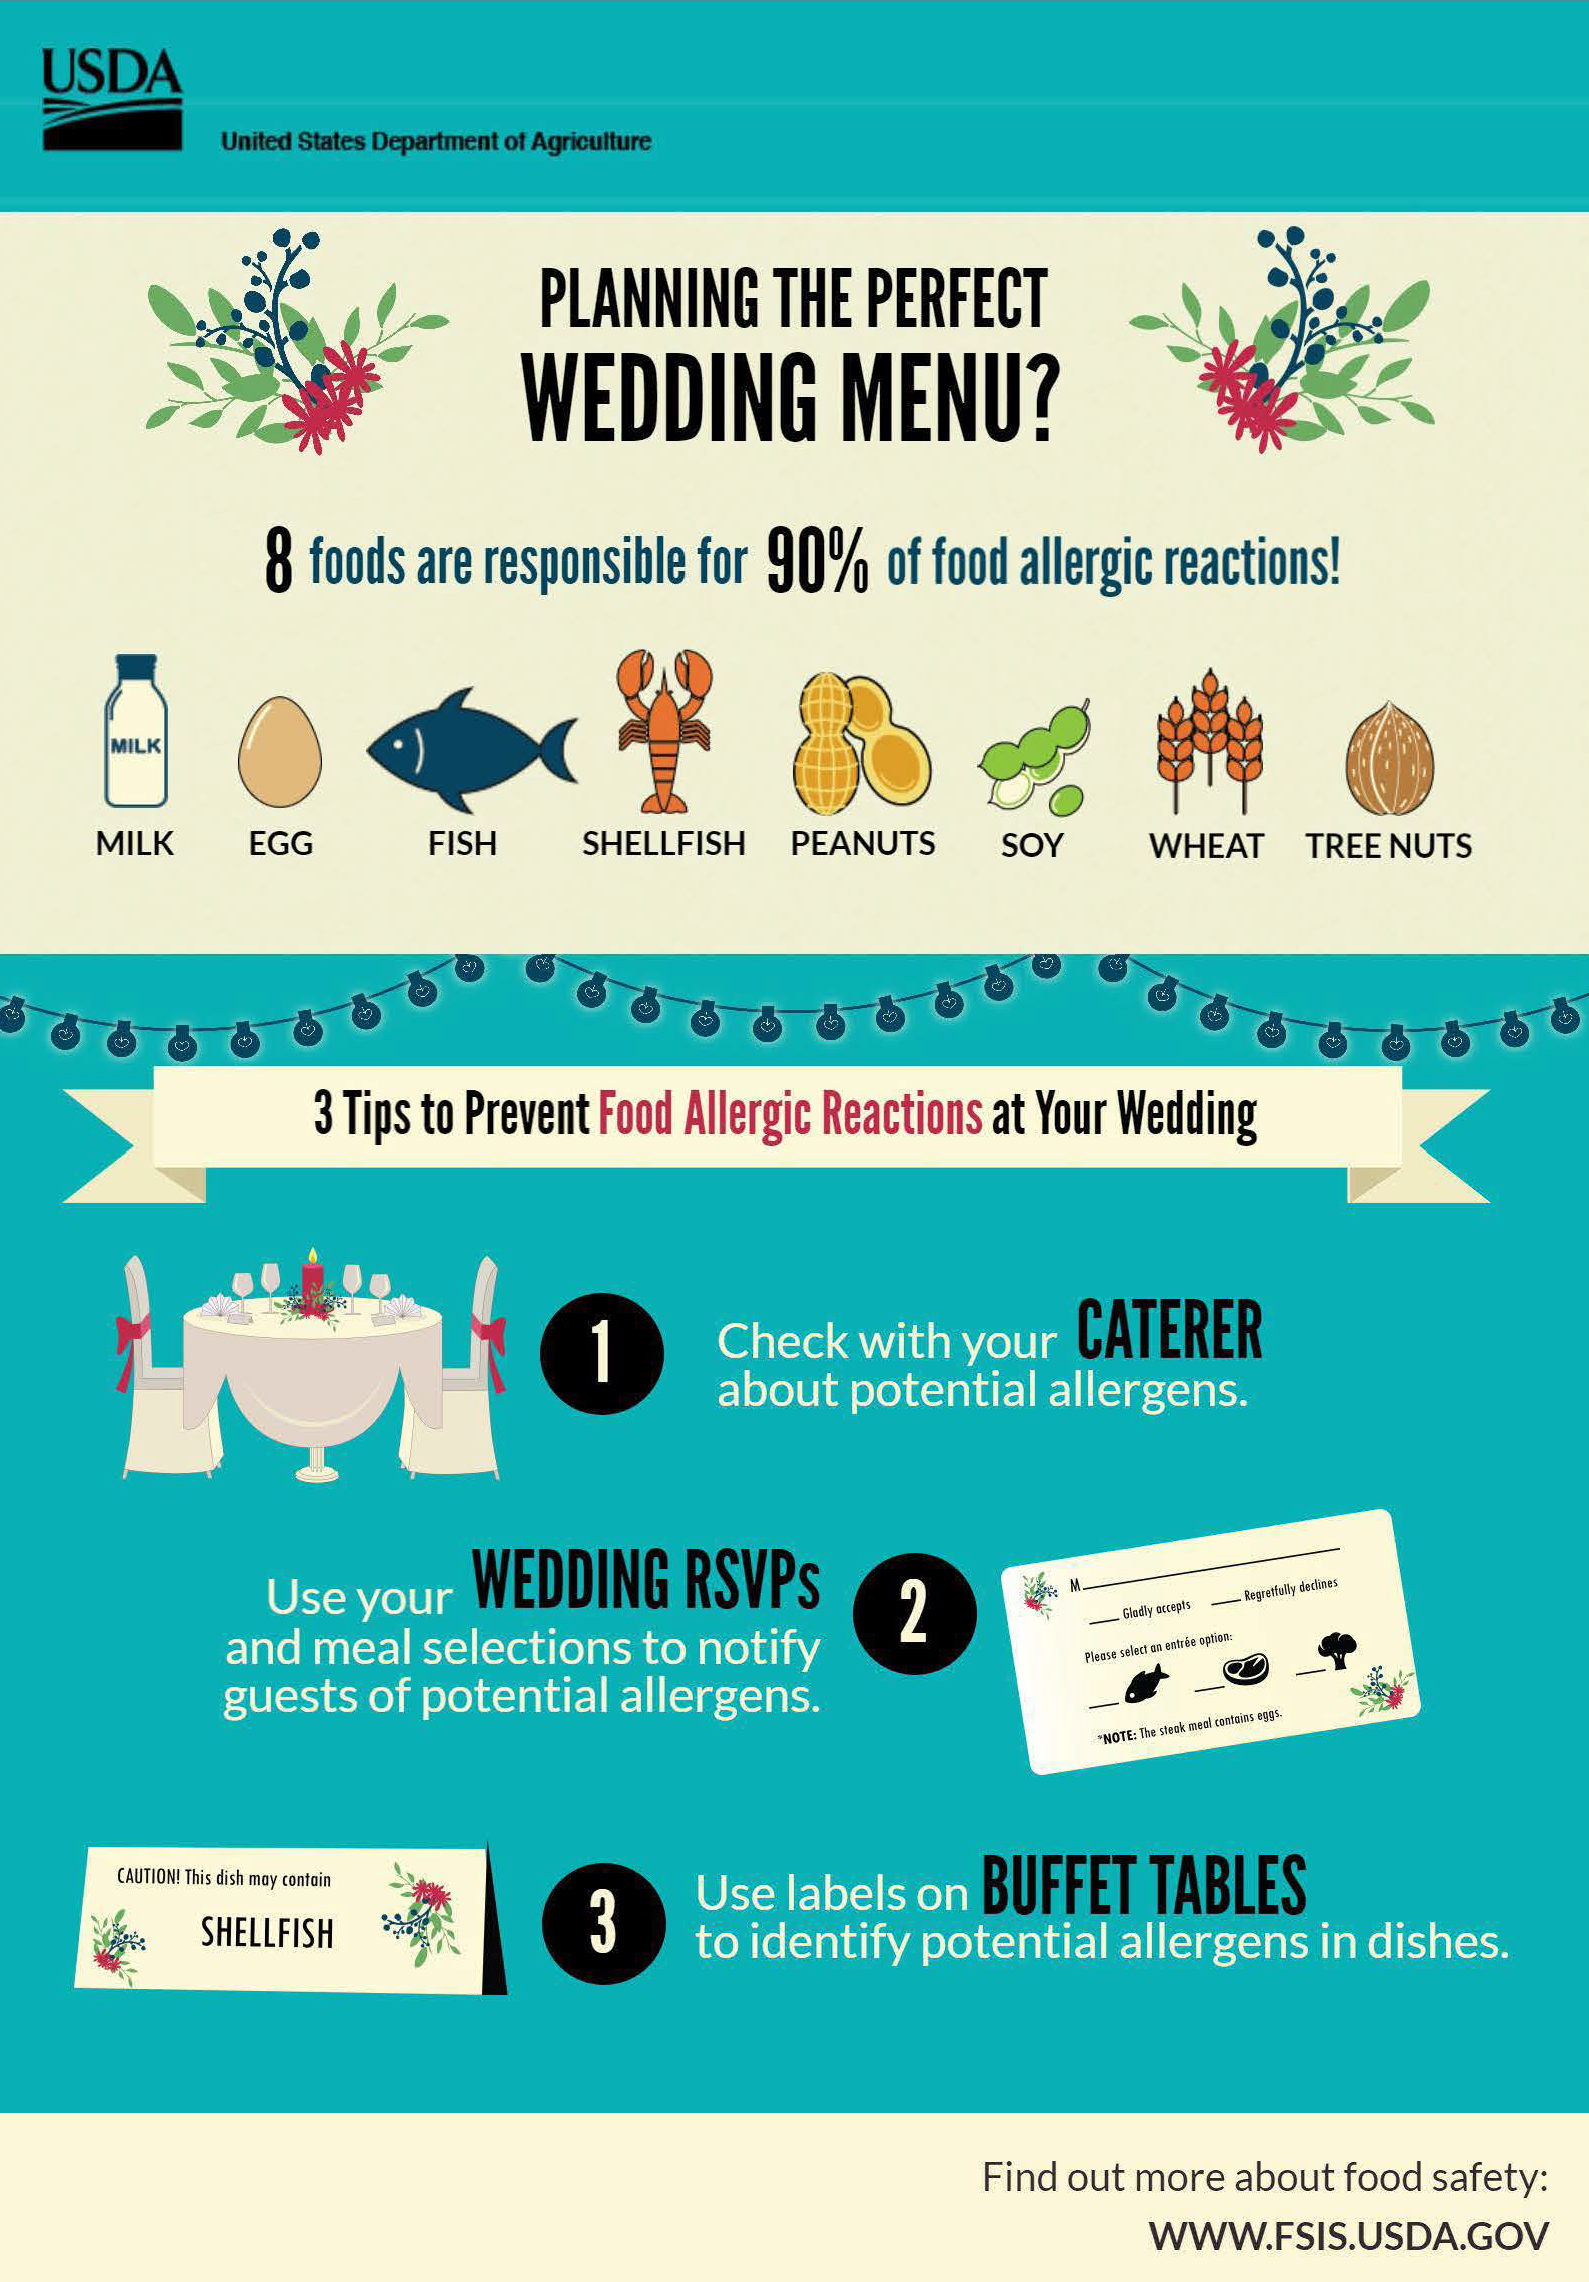 This infographic shares tips on how to plan a safe wedding menu and avoid potential food allergens.